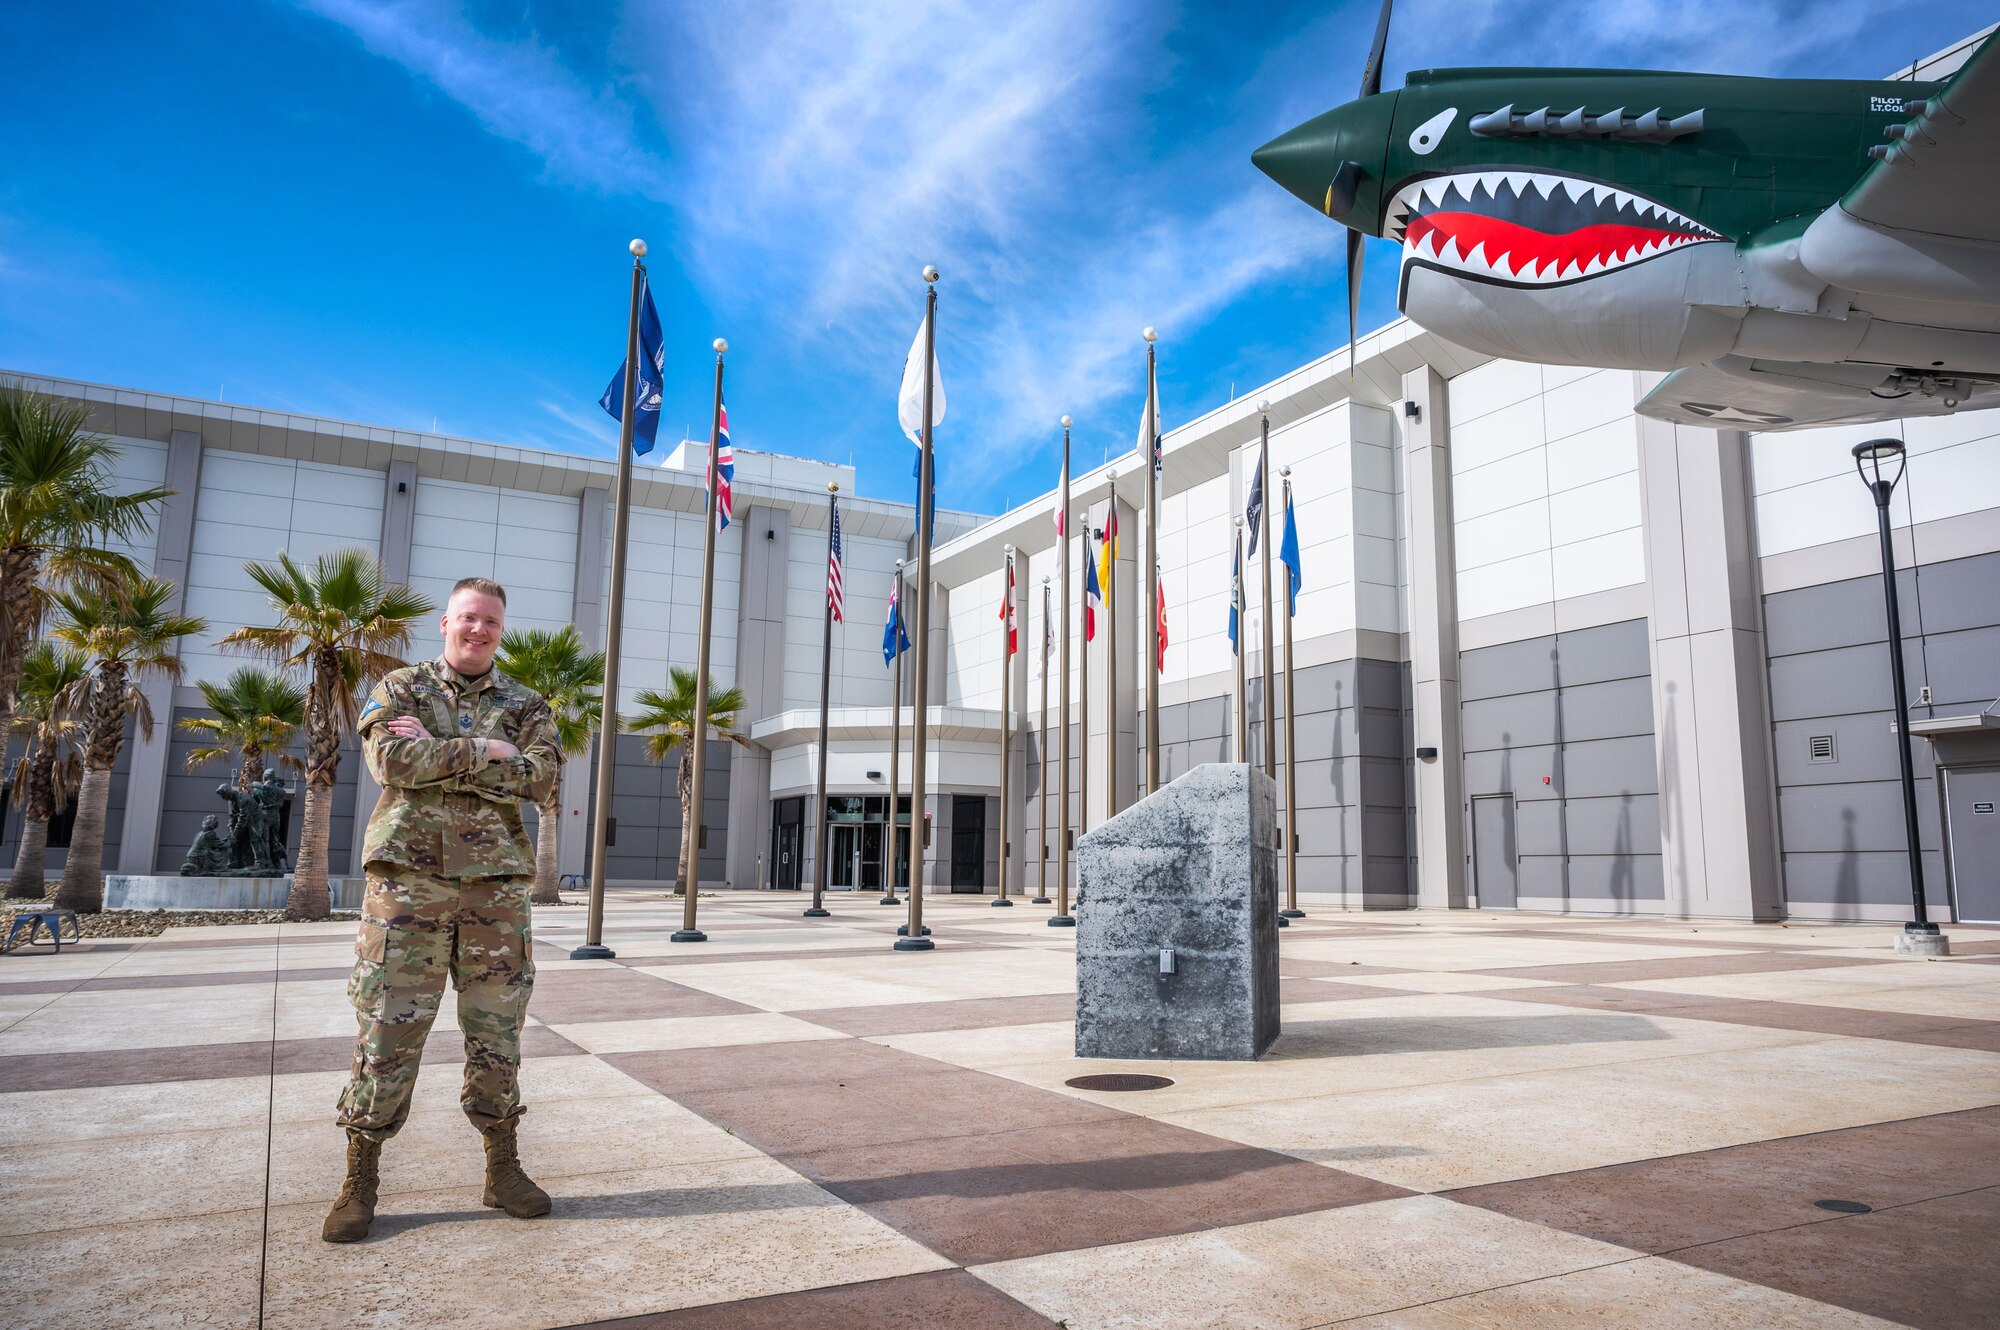 U.S. Space Force Master Sgt. Josef Margetiak, Space Delta 5 Intelligence, Surveillance and Reconnaissance Division operations superintendent, stand in from of the Combined Force Space Component Command building at Vandenberg Space Force Base, Calif., Dec. 16, 2022. Margetiak was selected for the William O. Studeman military award which recognizes early- and mid-career military members across the DoD for their contributions over the last 3-to-5 years to their unit’s mission, intelligence and national security communities, and national level impacts. (U.S. Space Force photo by Tech. Sgt. Luke Kitterman)